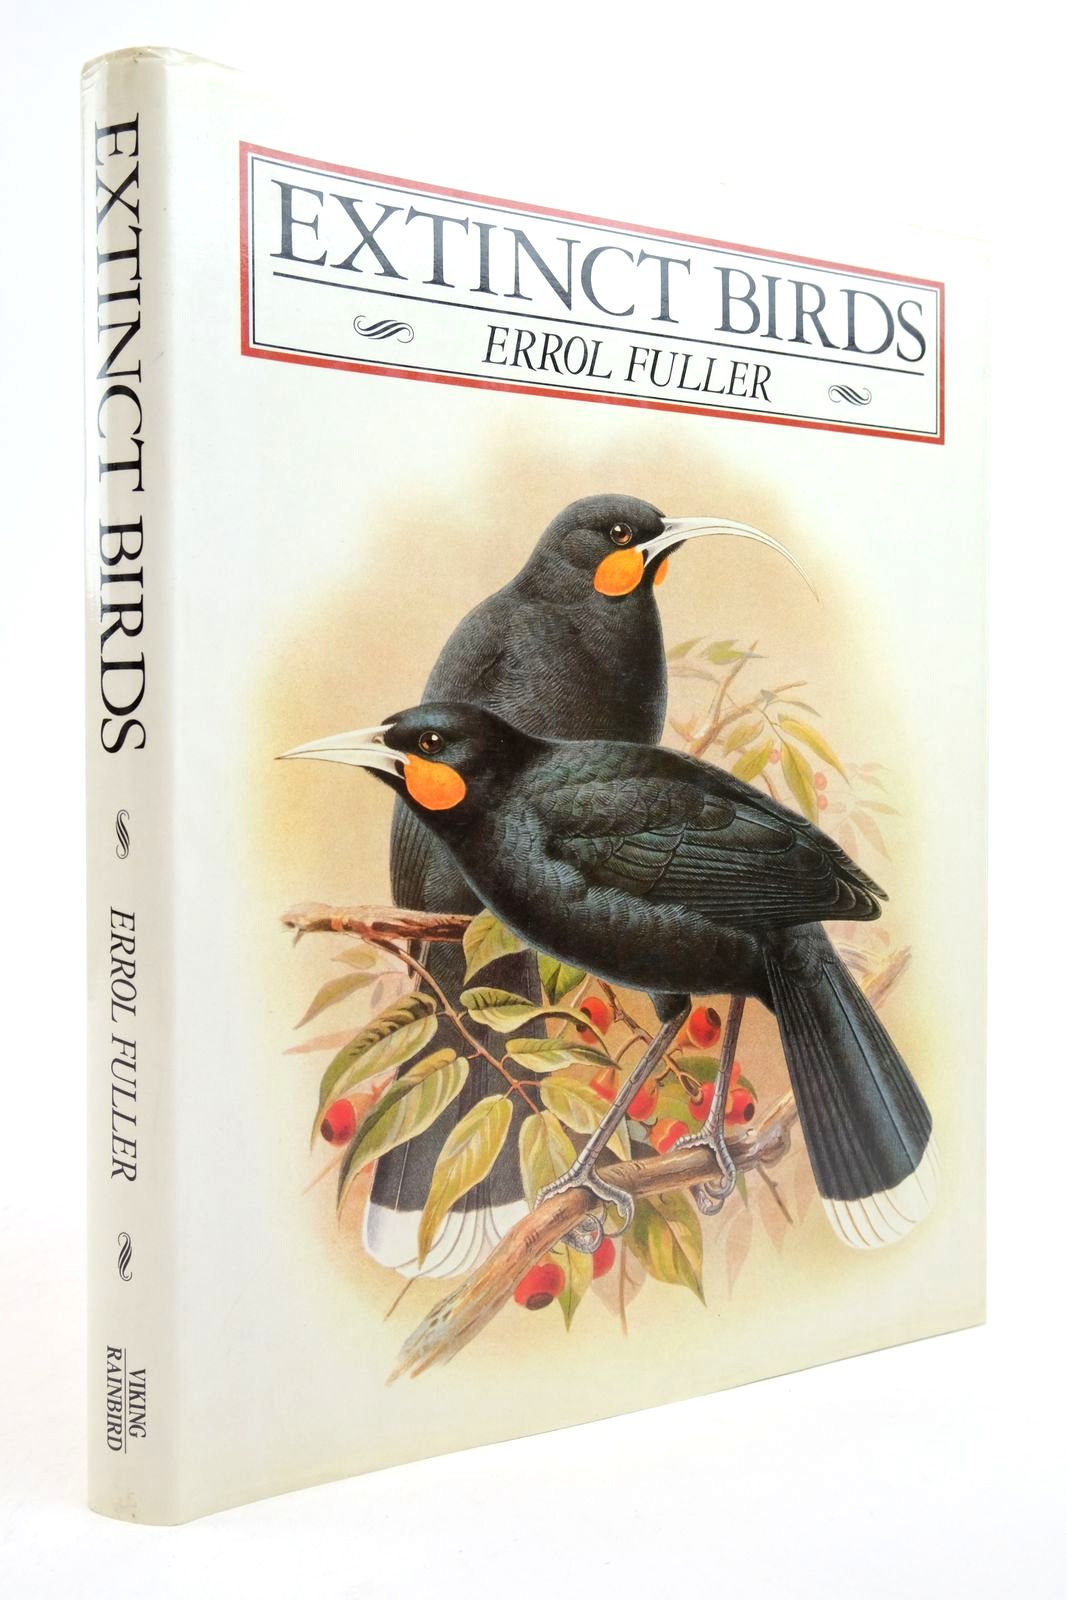 Photo of EXTINCT BIRDS written by Fuller, Errol published by Viking, Rainbird (STOCK CODE: 2140097)  for sale by Stella & Rose's Books